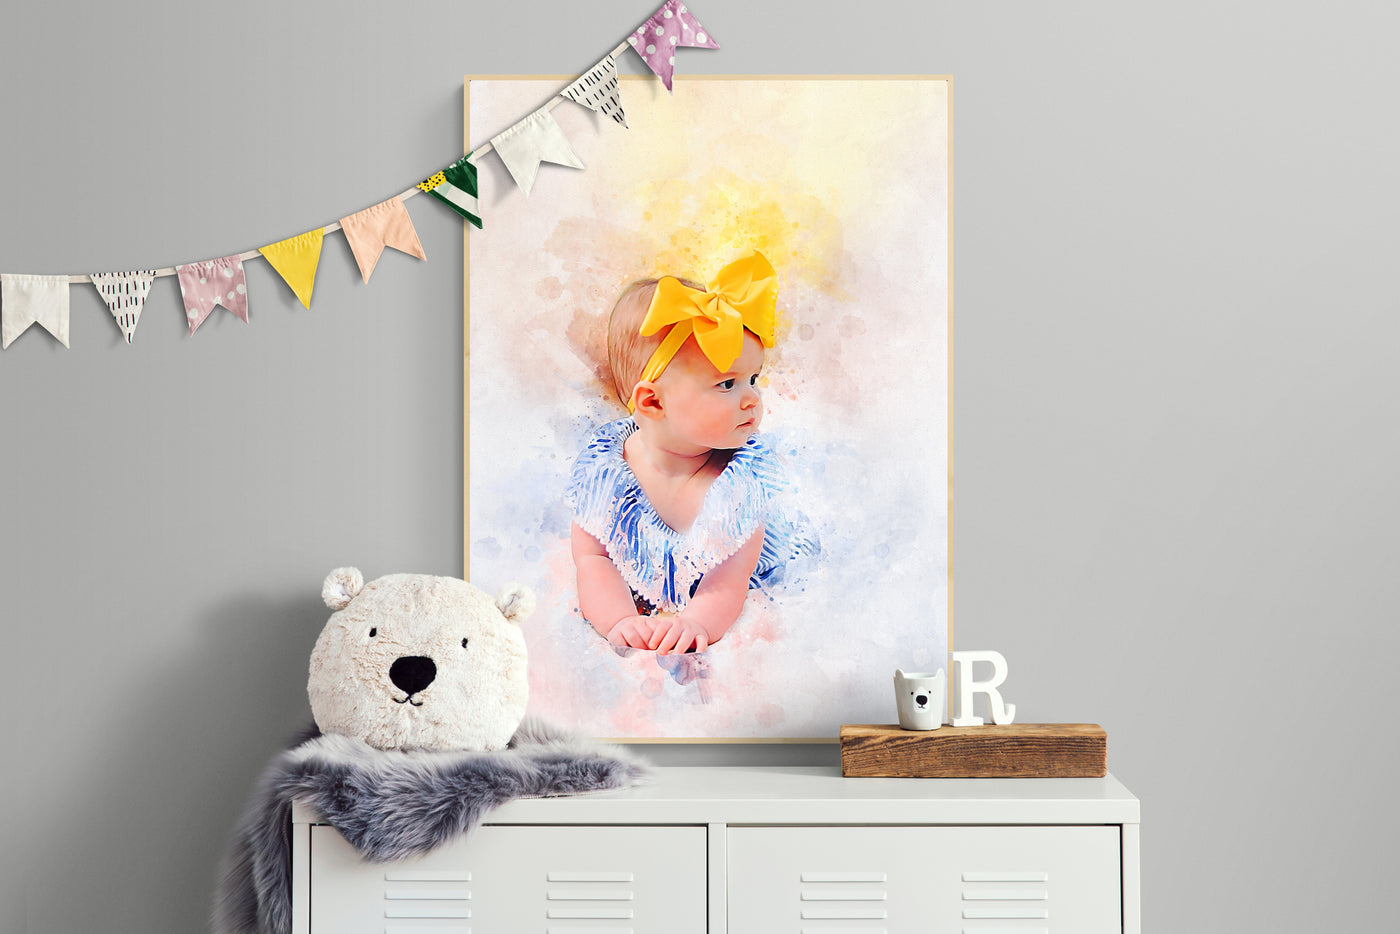 Personalized Baby Portrait | Watercolor Painting | First Birthday Gift